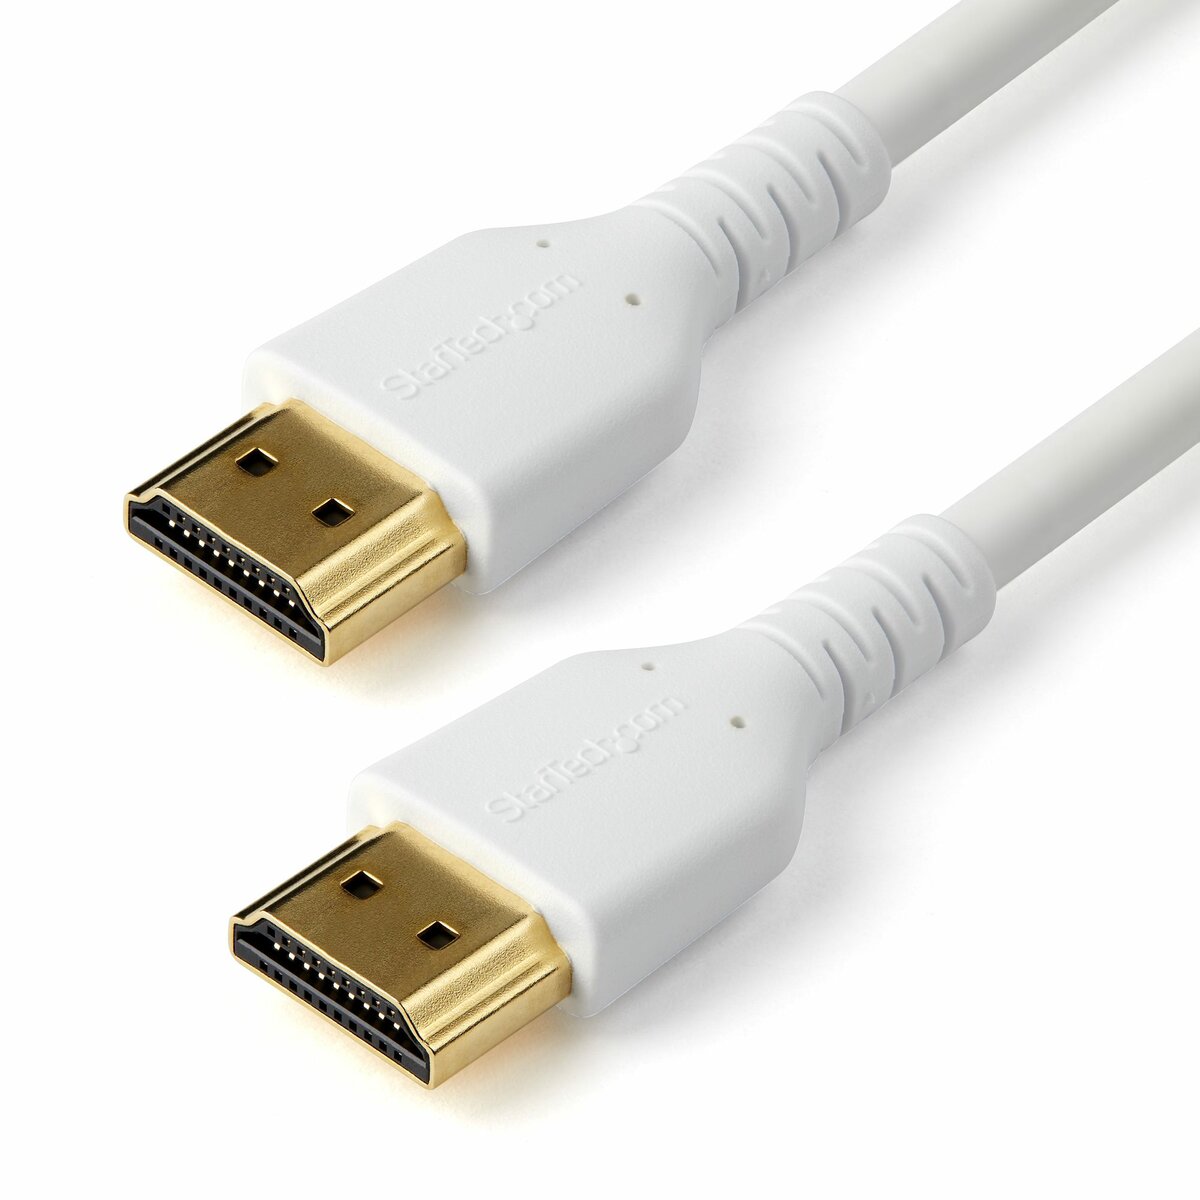 Shop  StarTech.com 6ft (2m) HDMI 2.1 Cable - Certified Ultra High